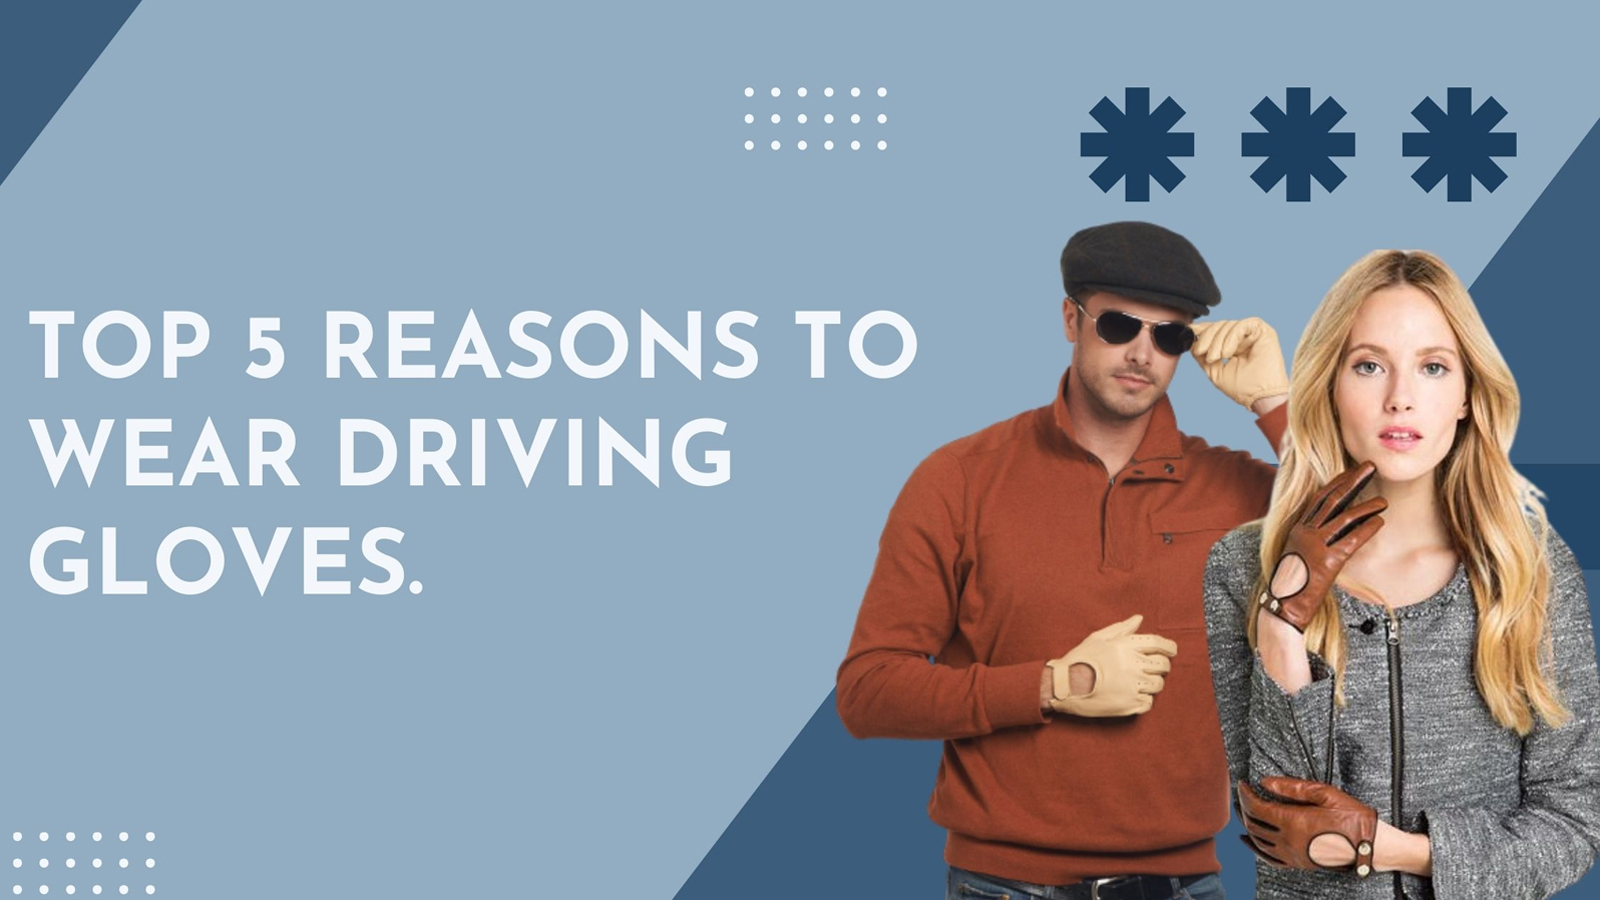 Top 5 Reasons to Wear Driving Gloves.